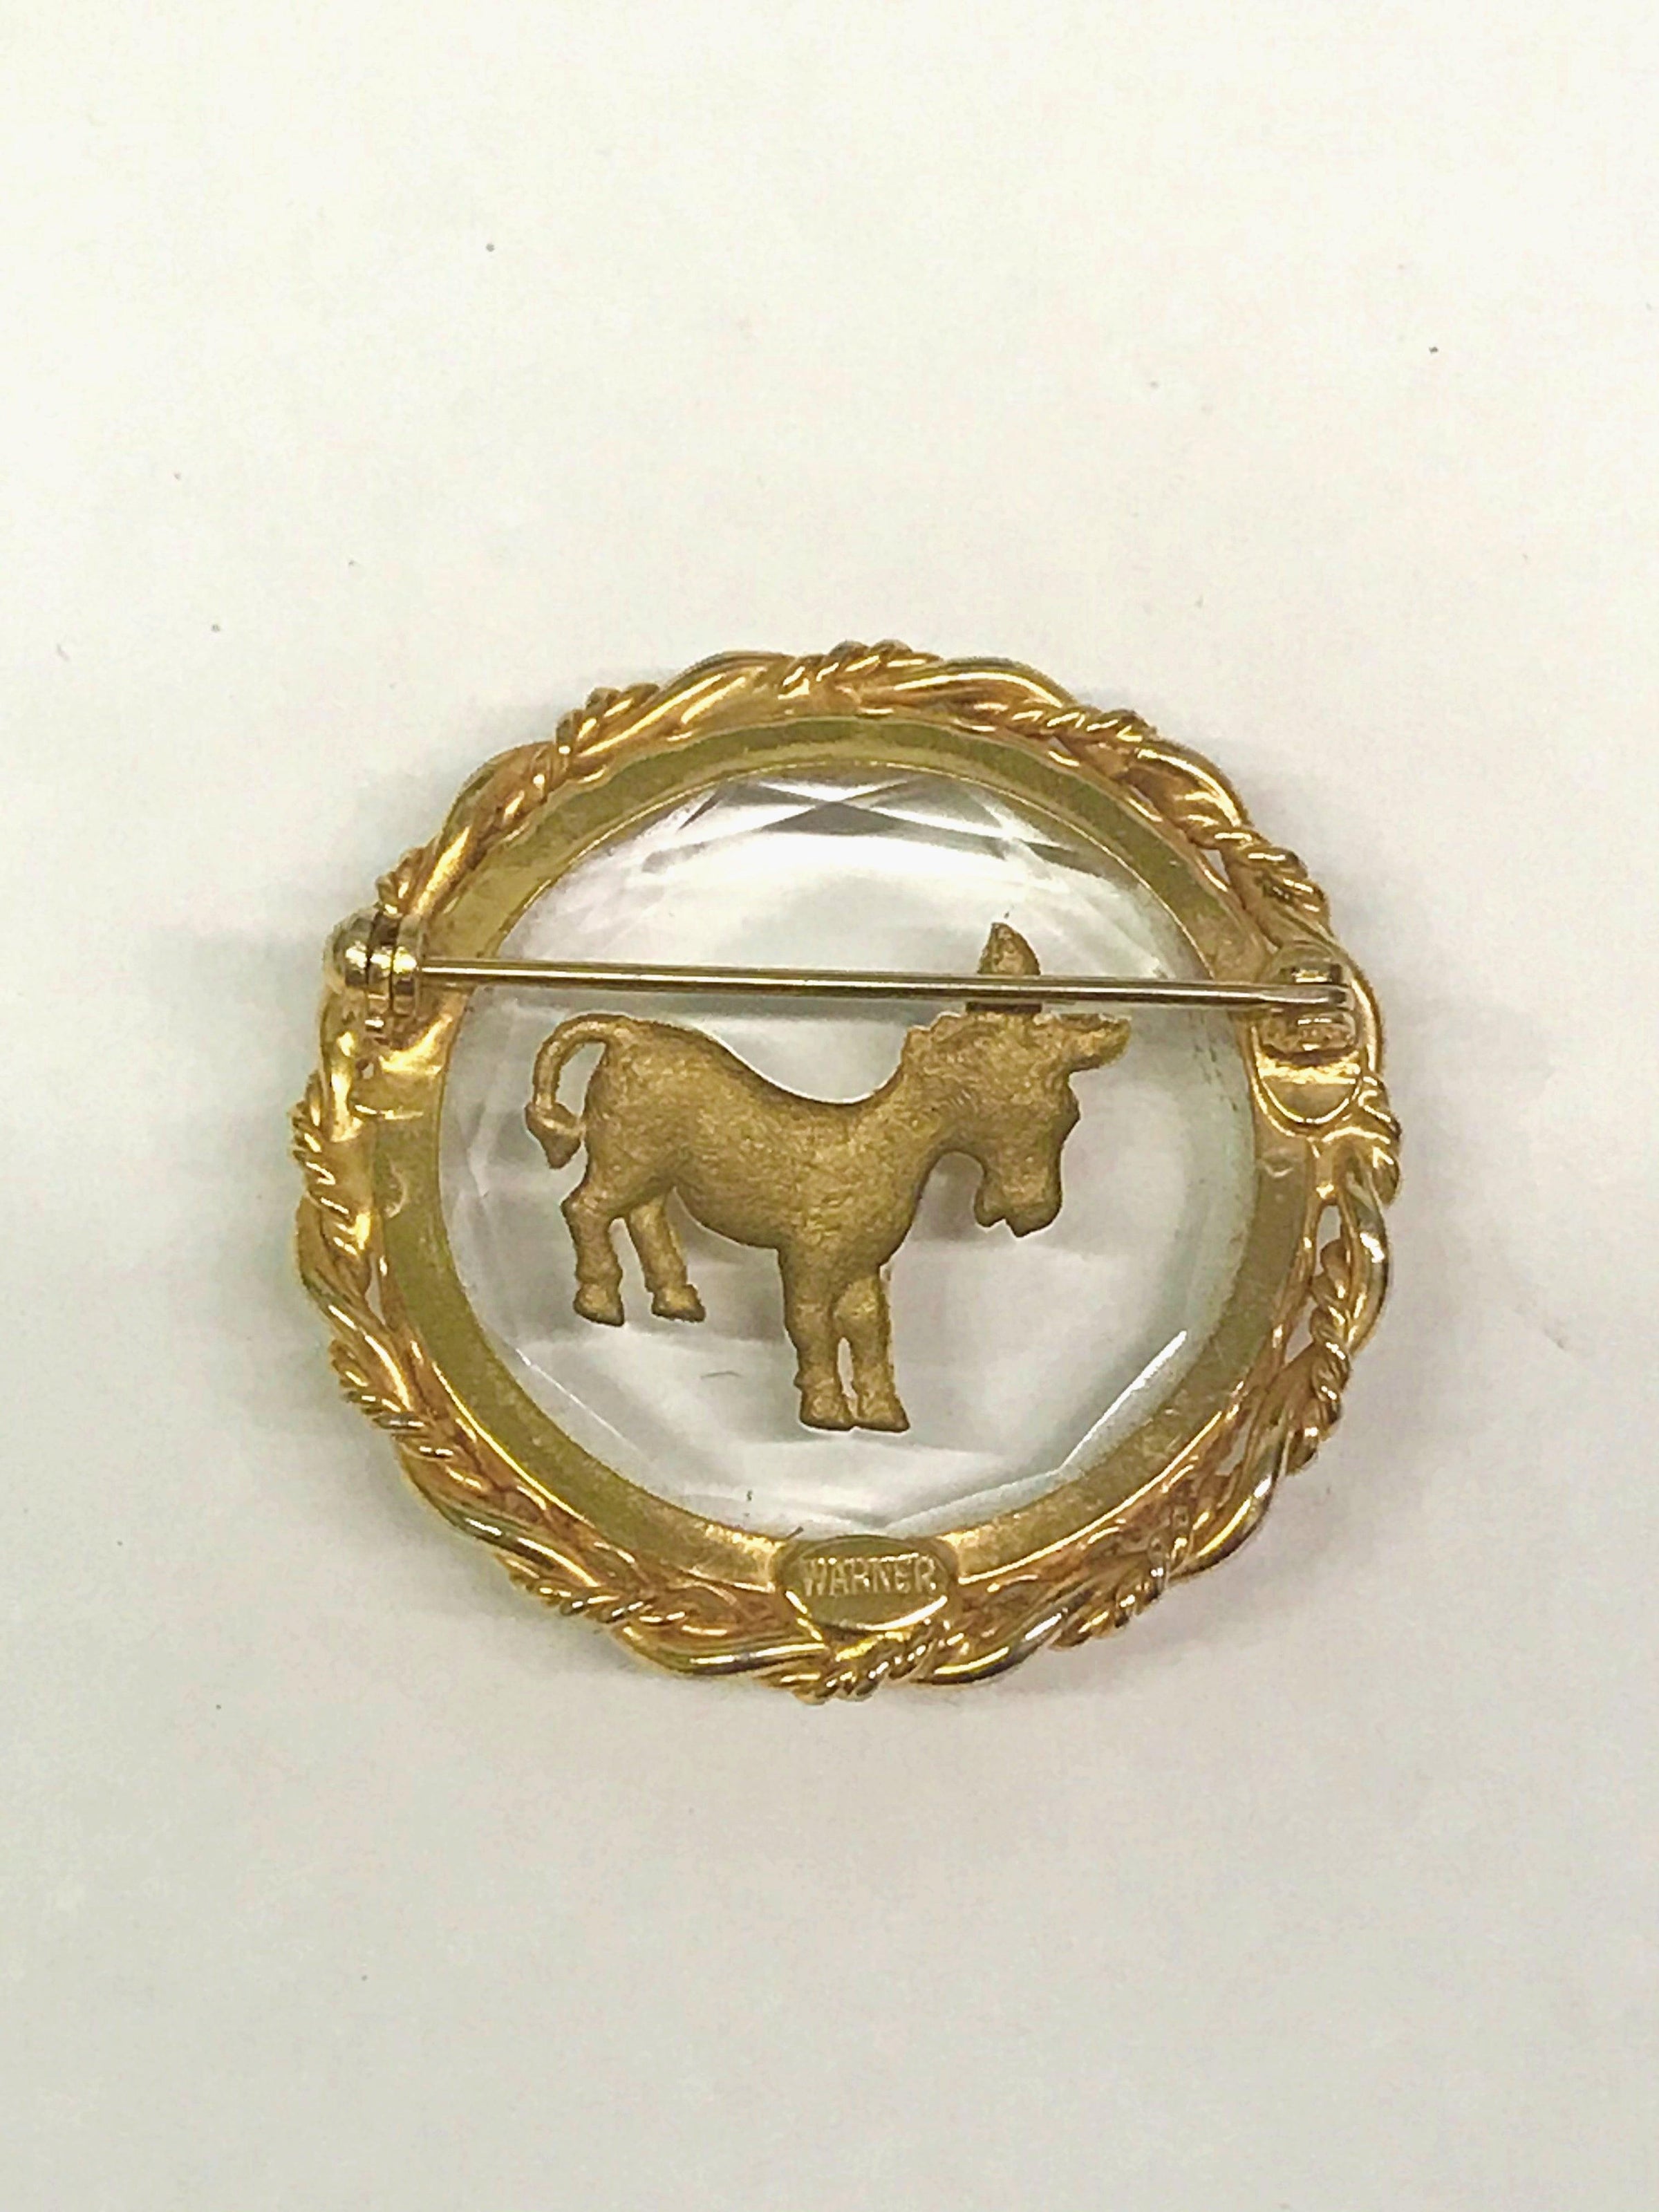 Warner Intaglio Donkey Brooch Pin - Hers and His Treasures